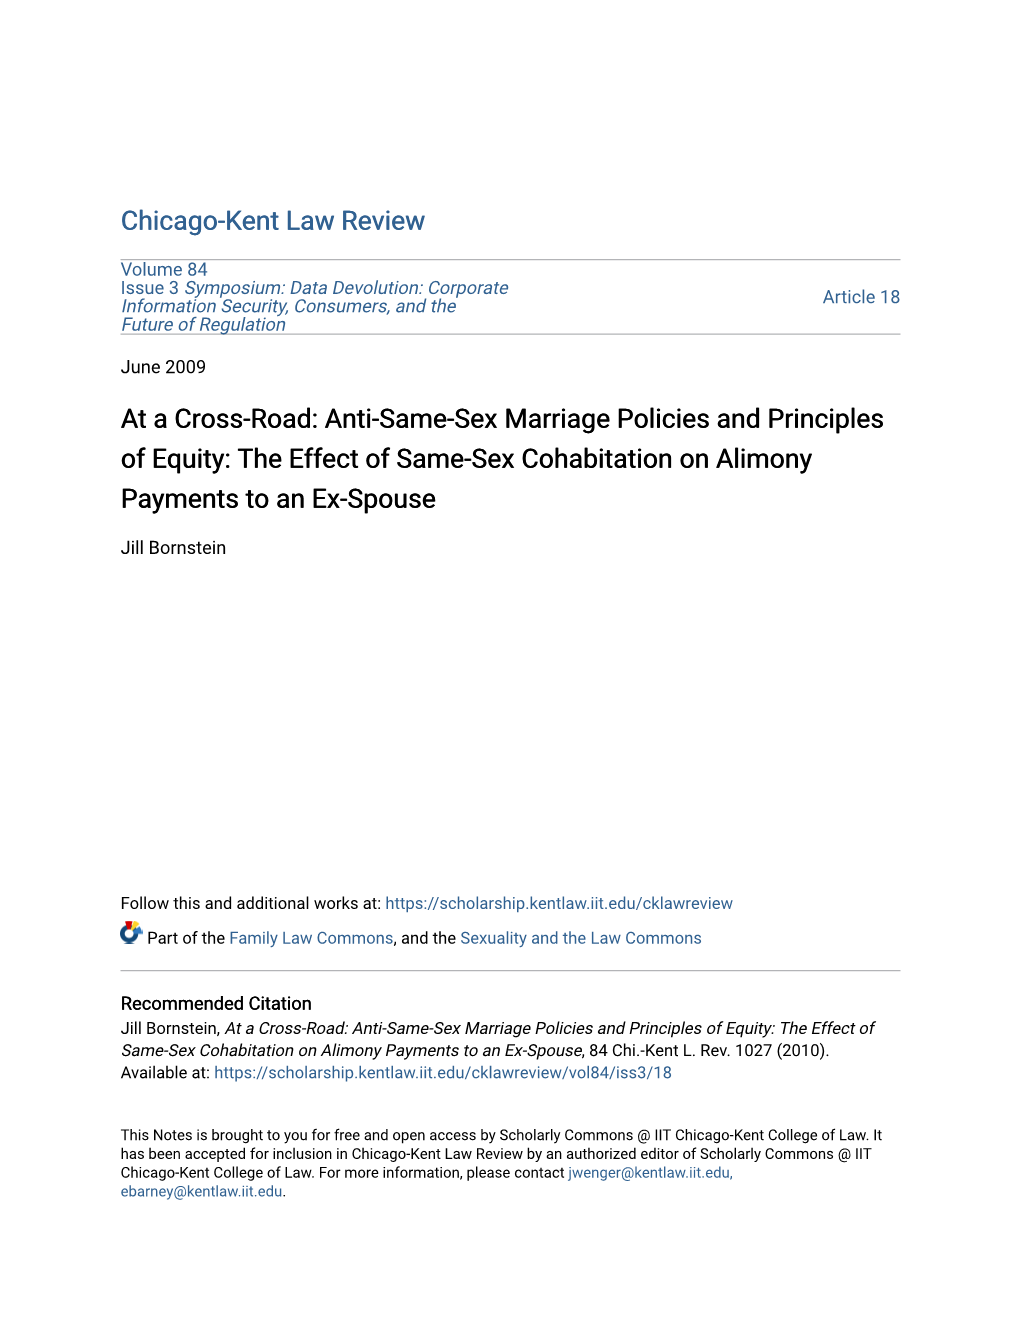 Anti-Same-Sex Marriage Policies and Principles of Equity: the Effect of Same-Sex Cohabitation on Alimony Payments to an Ex-Spouse